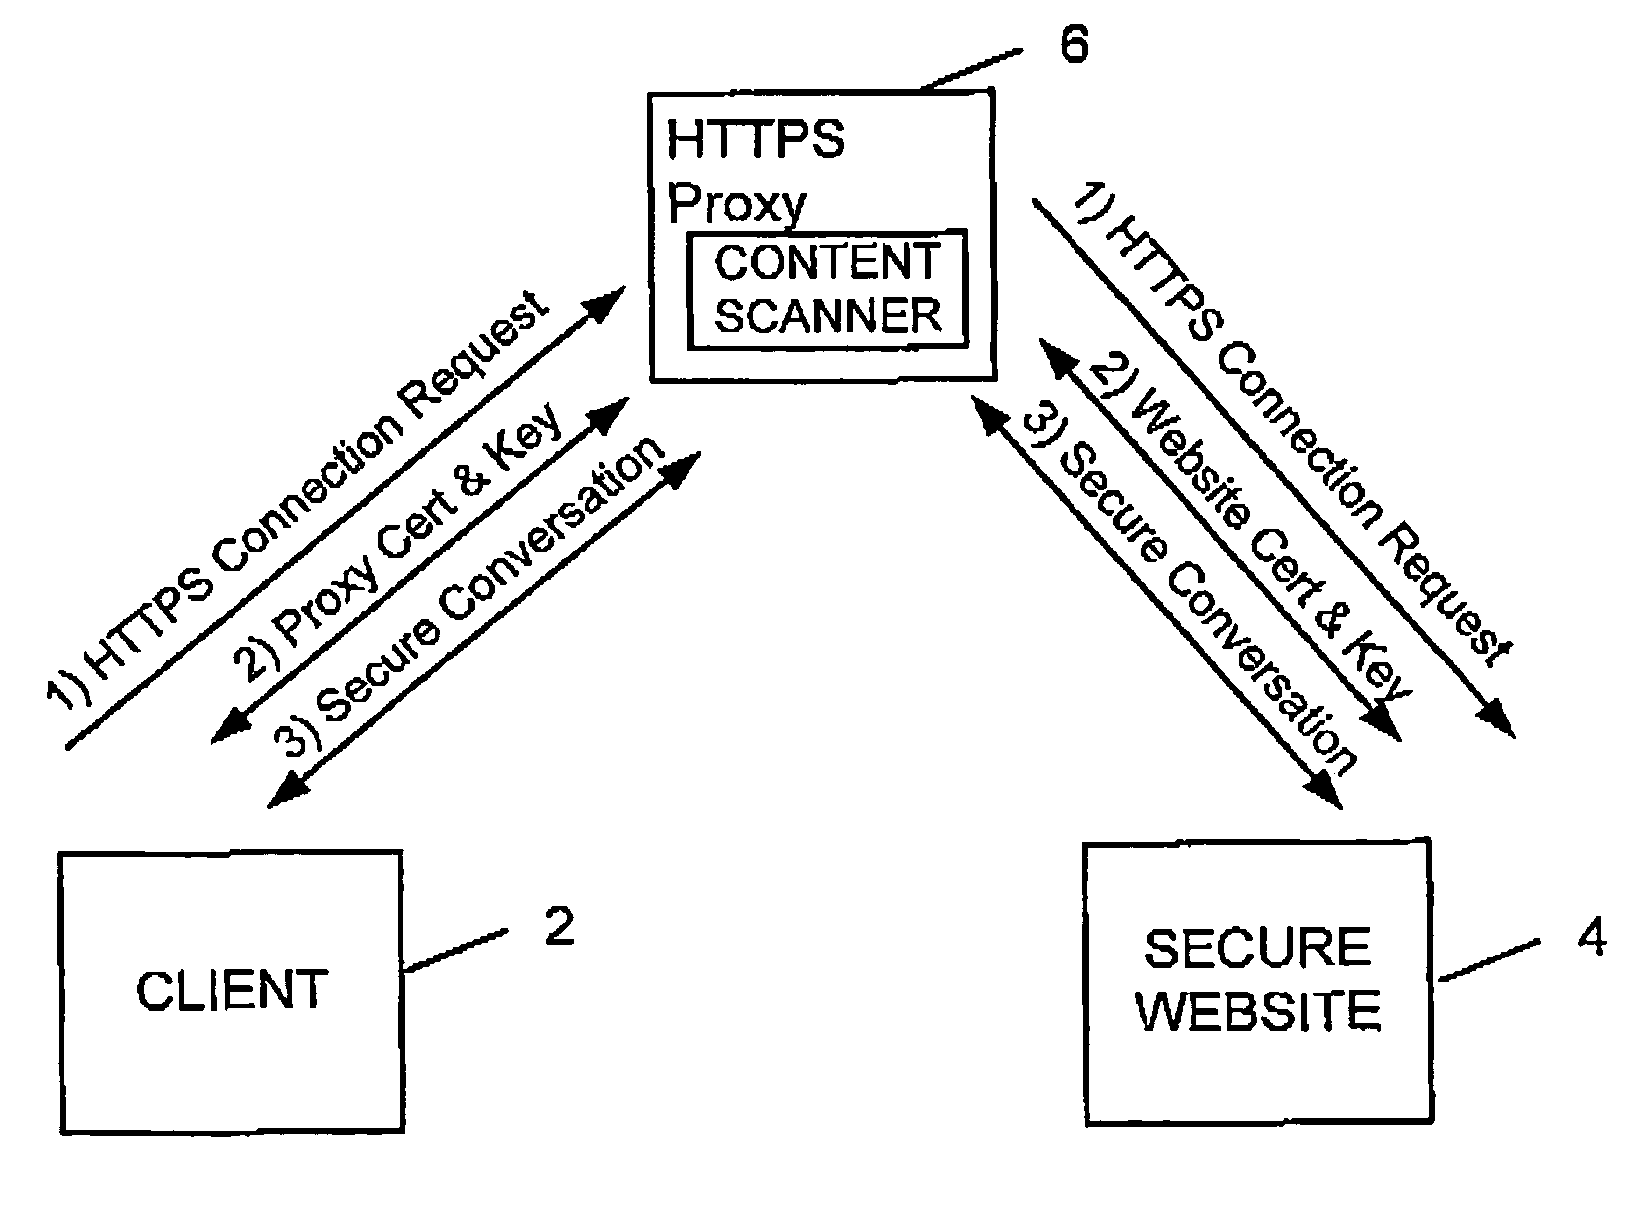 Transferring data via a secure network connection